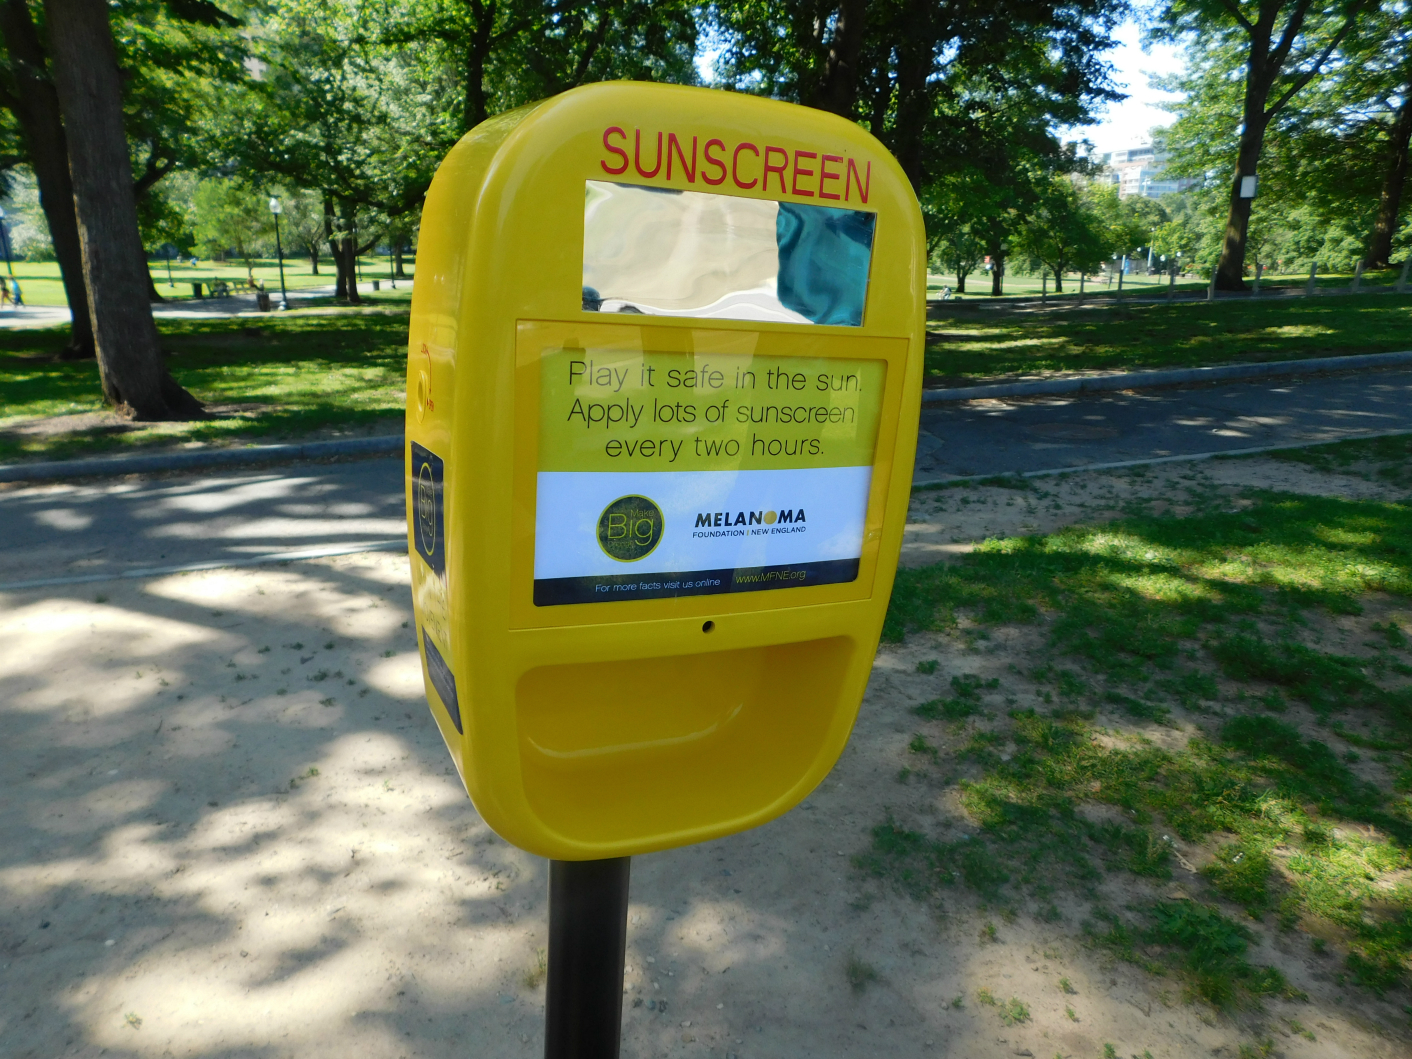 FREE Sunscreen for Boston's Public Parks